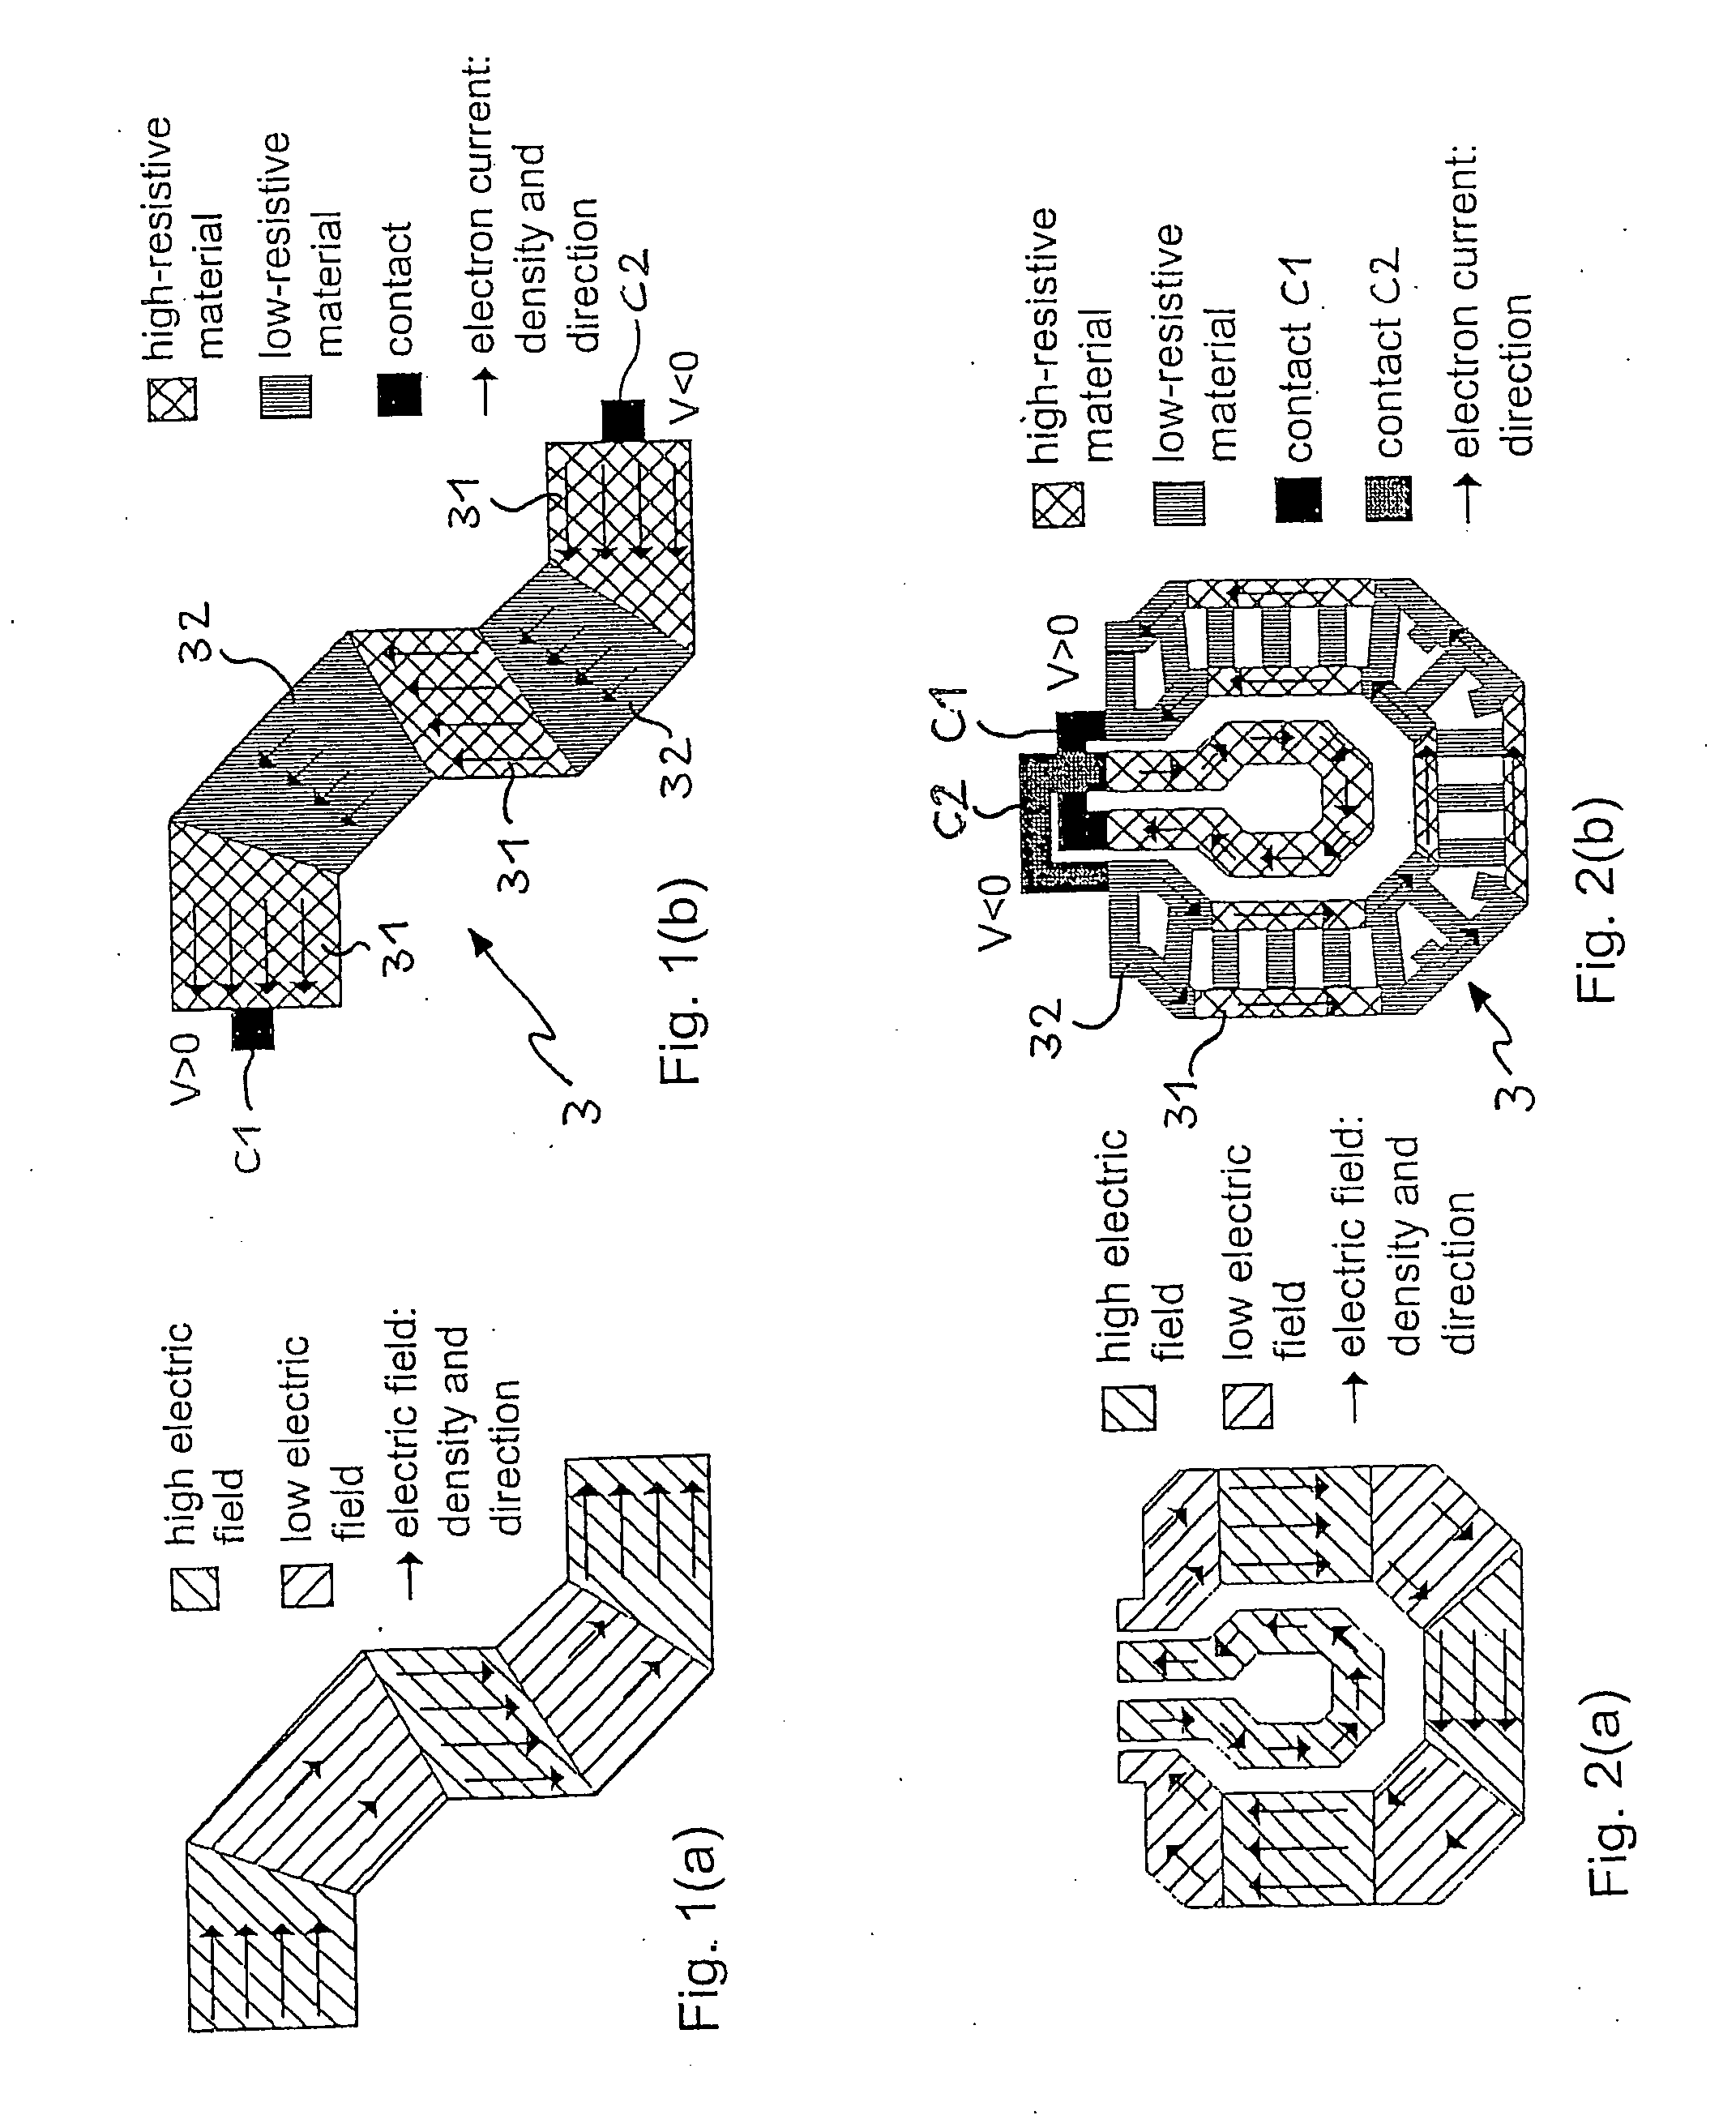 Large -area pixel for use in an image sensor